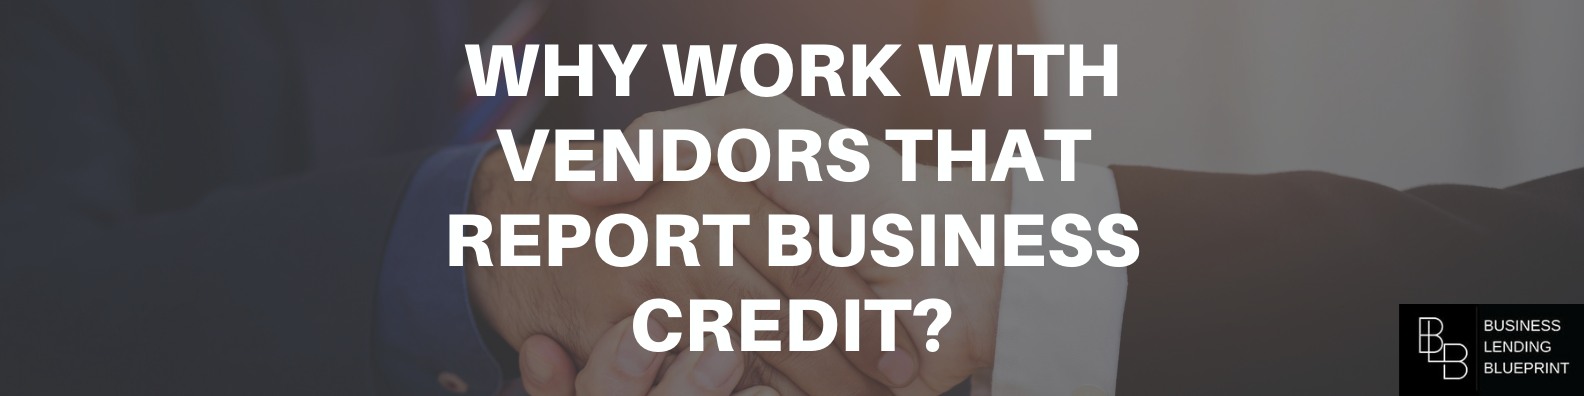 Why Work With Vendors That Report Business Credit